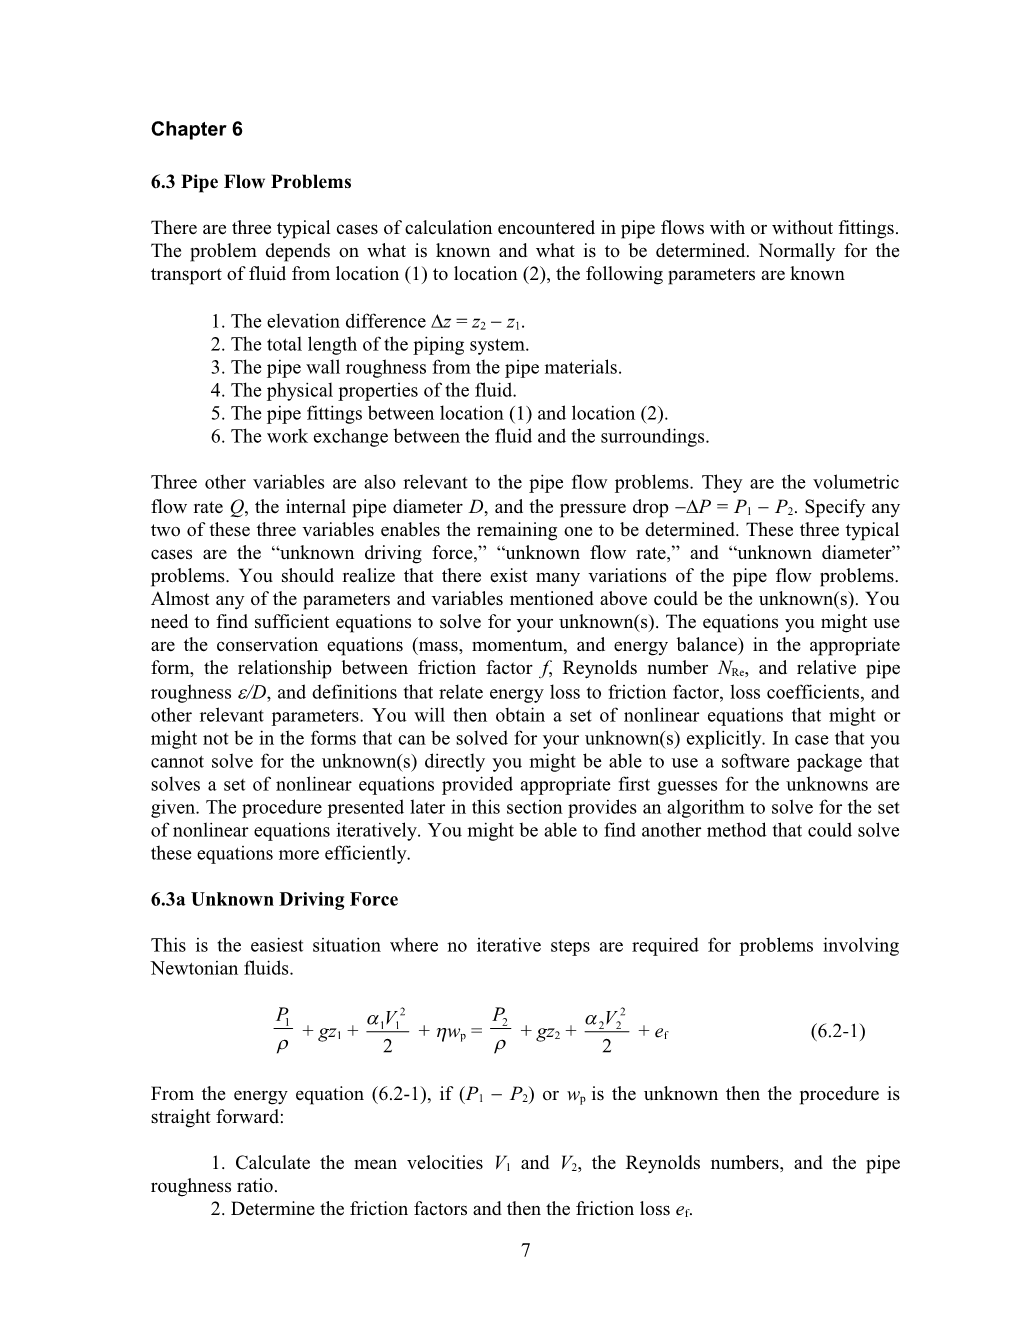 Partial Differential Equations in Two Or More Dimensions